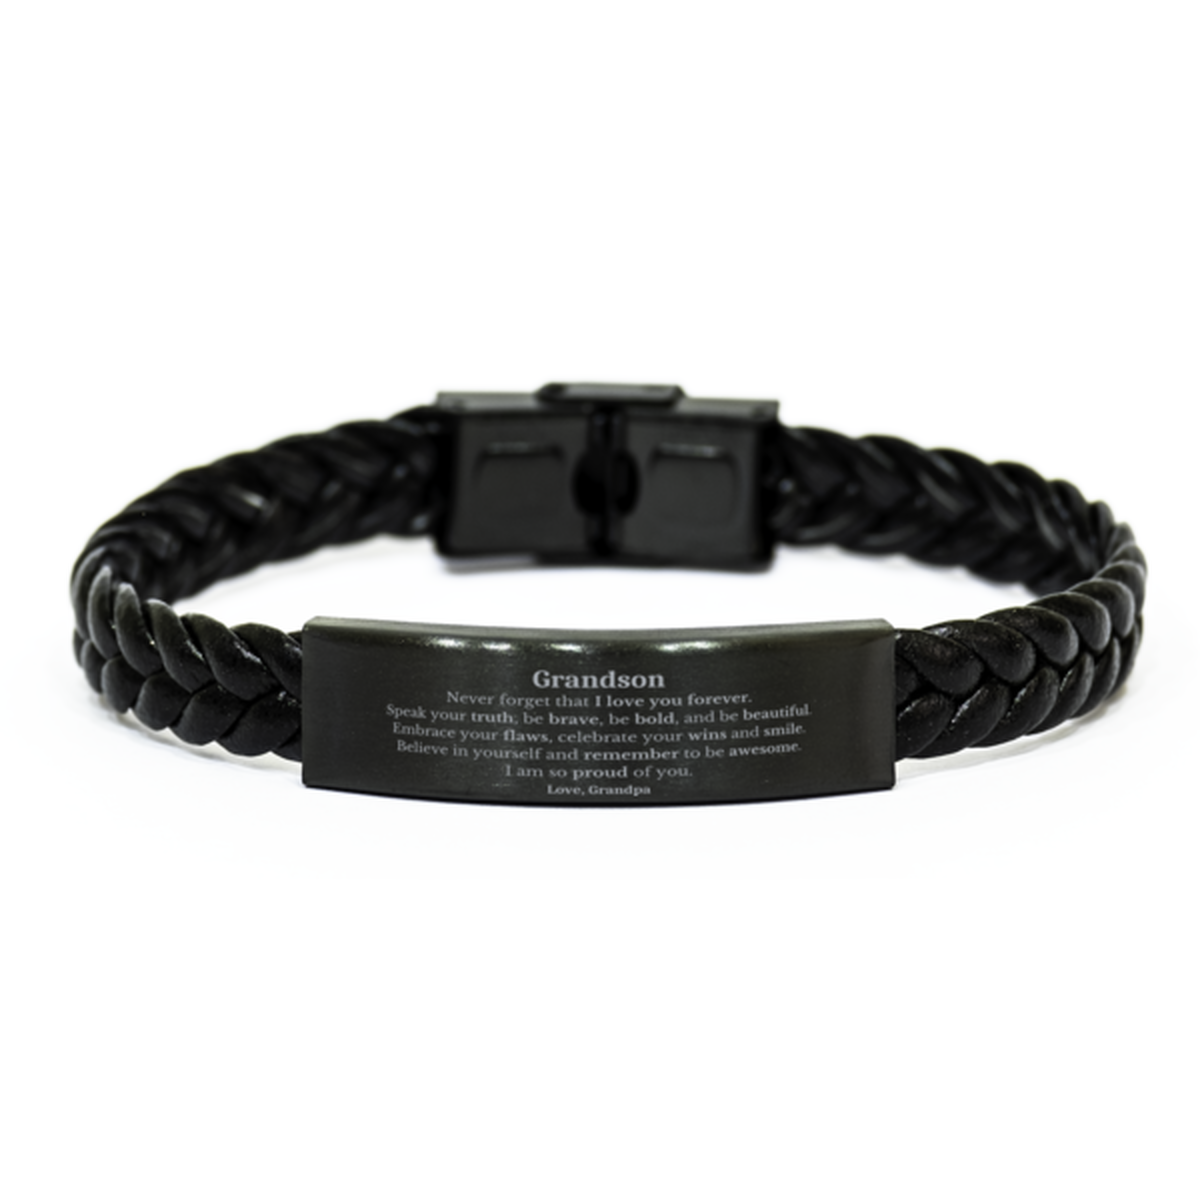 Grandson Braided Leather Bracelet, Never forget that I love you forever, Inspirational Grandson Birthday Unique Gifts From Grandpa